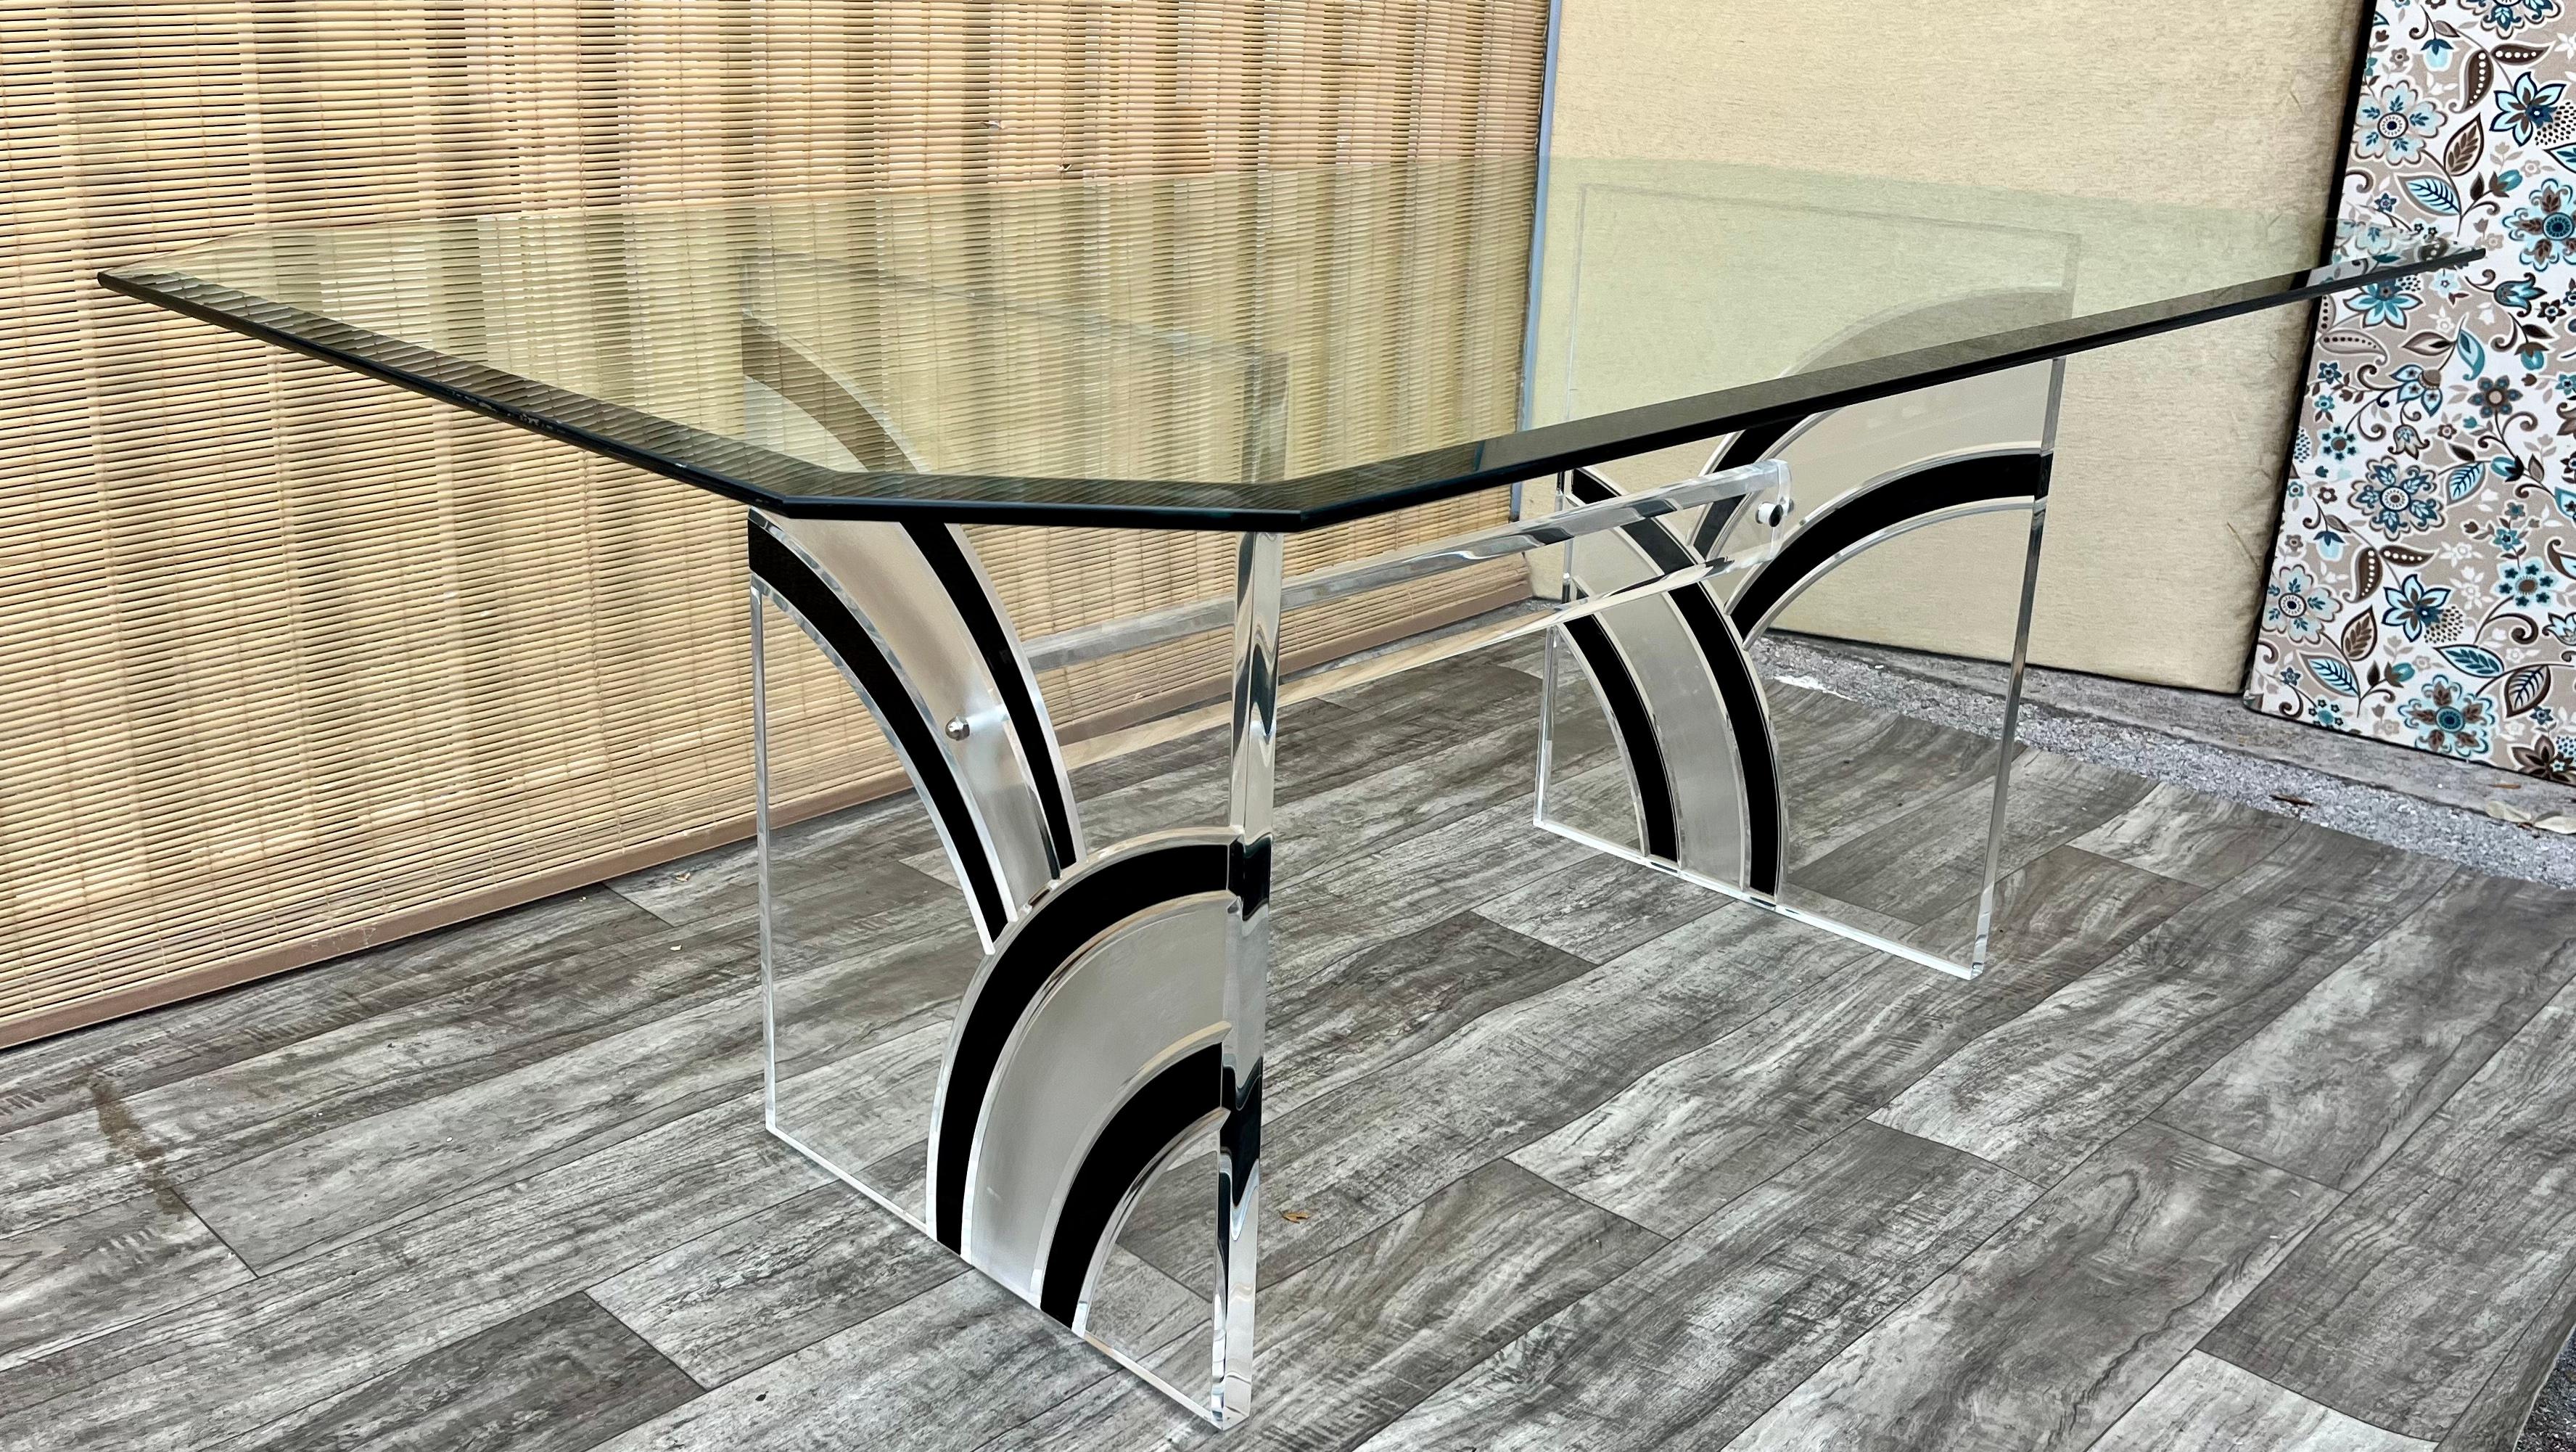 Vintage Mid Century Modern Lucite base Dining Table. Circa 1970s.
Features a Lucite base decorated with black arches with a removable glass top with notched corners.
In excellent original condition with very minor signs of wear and age. There are